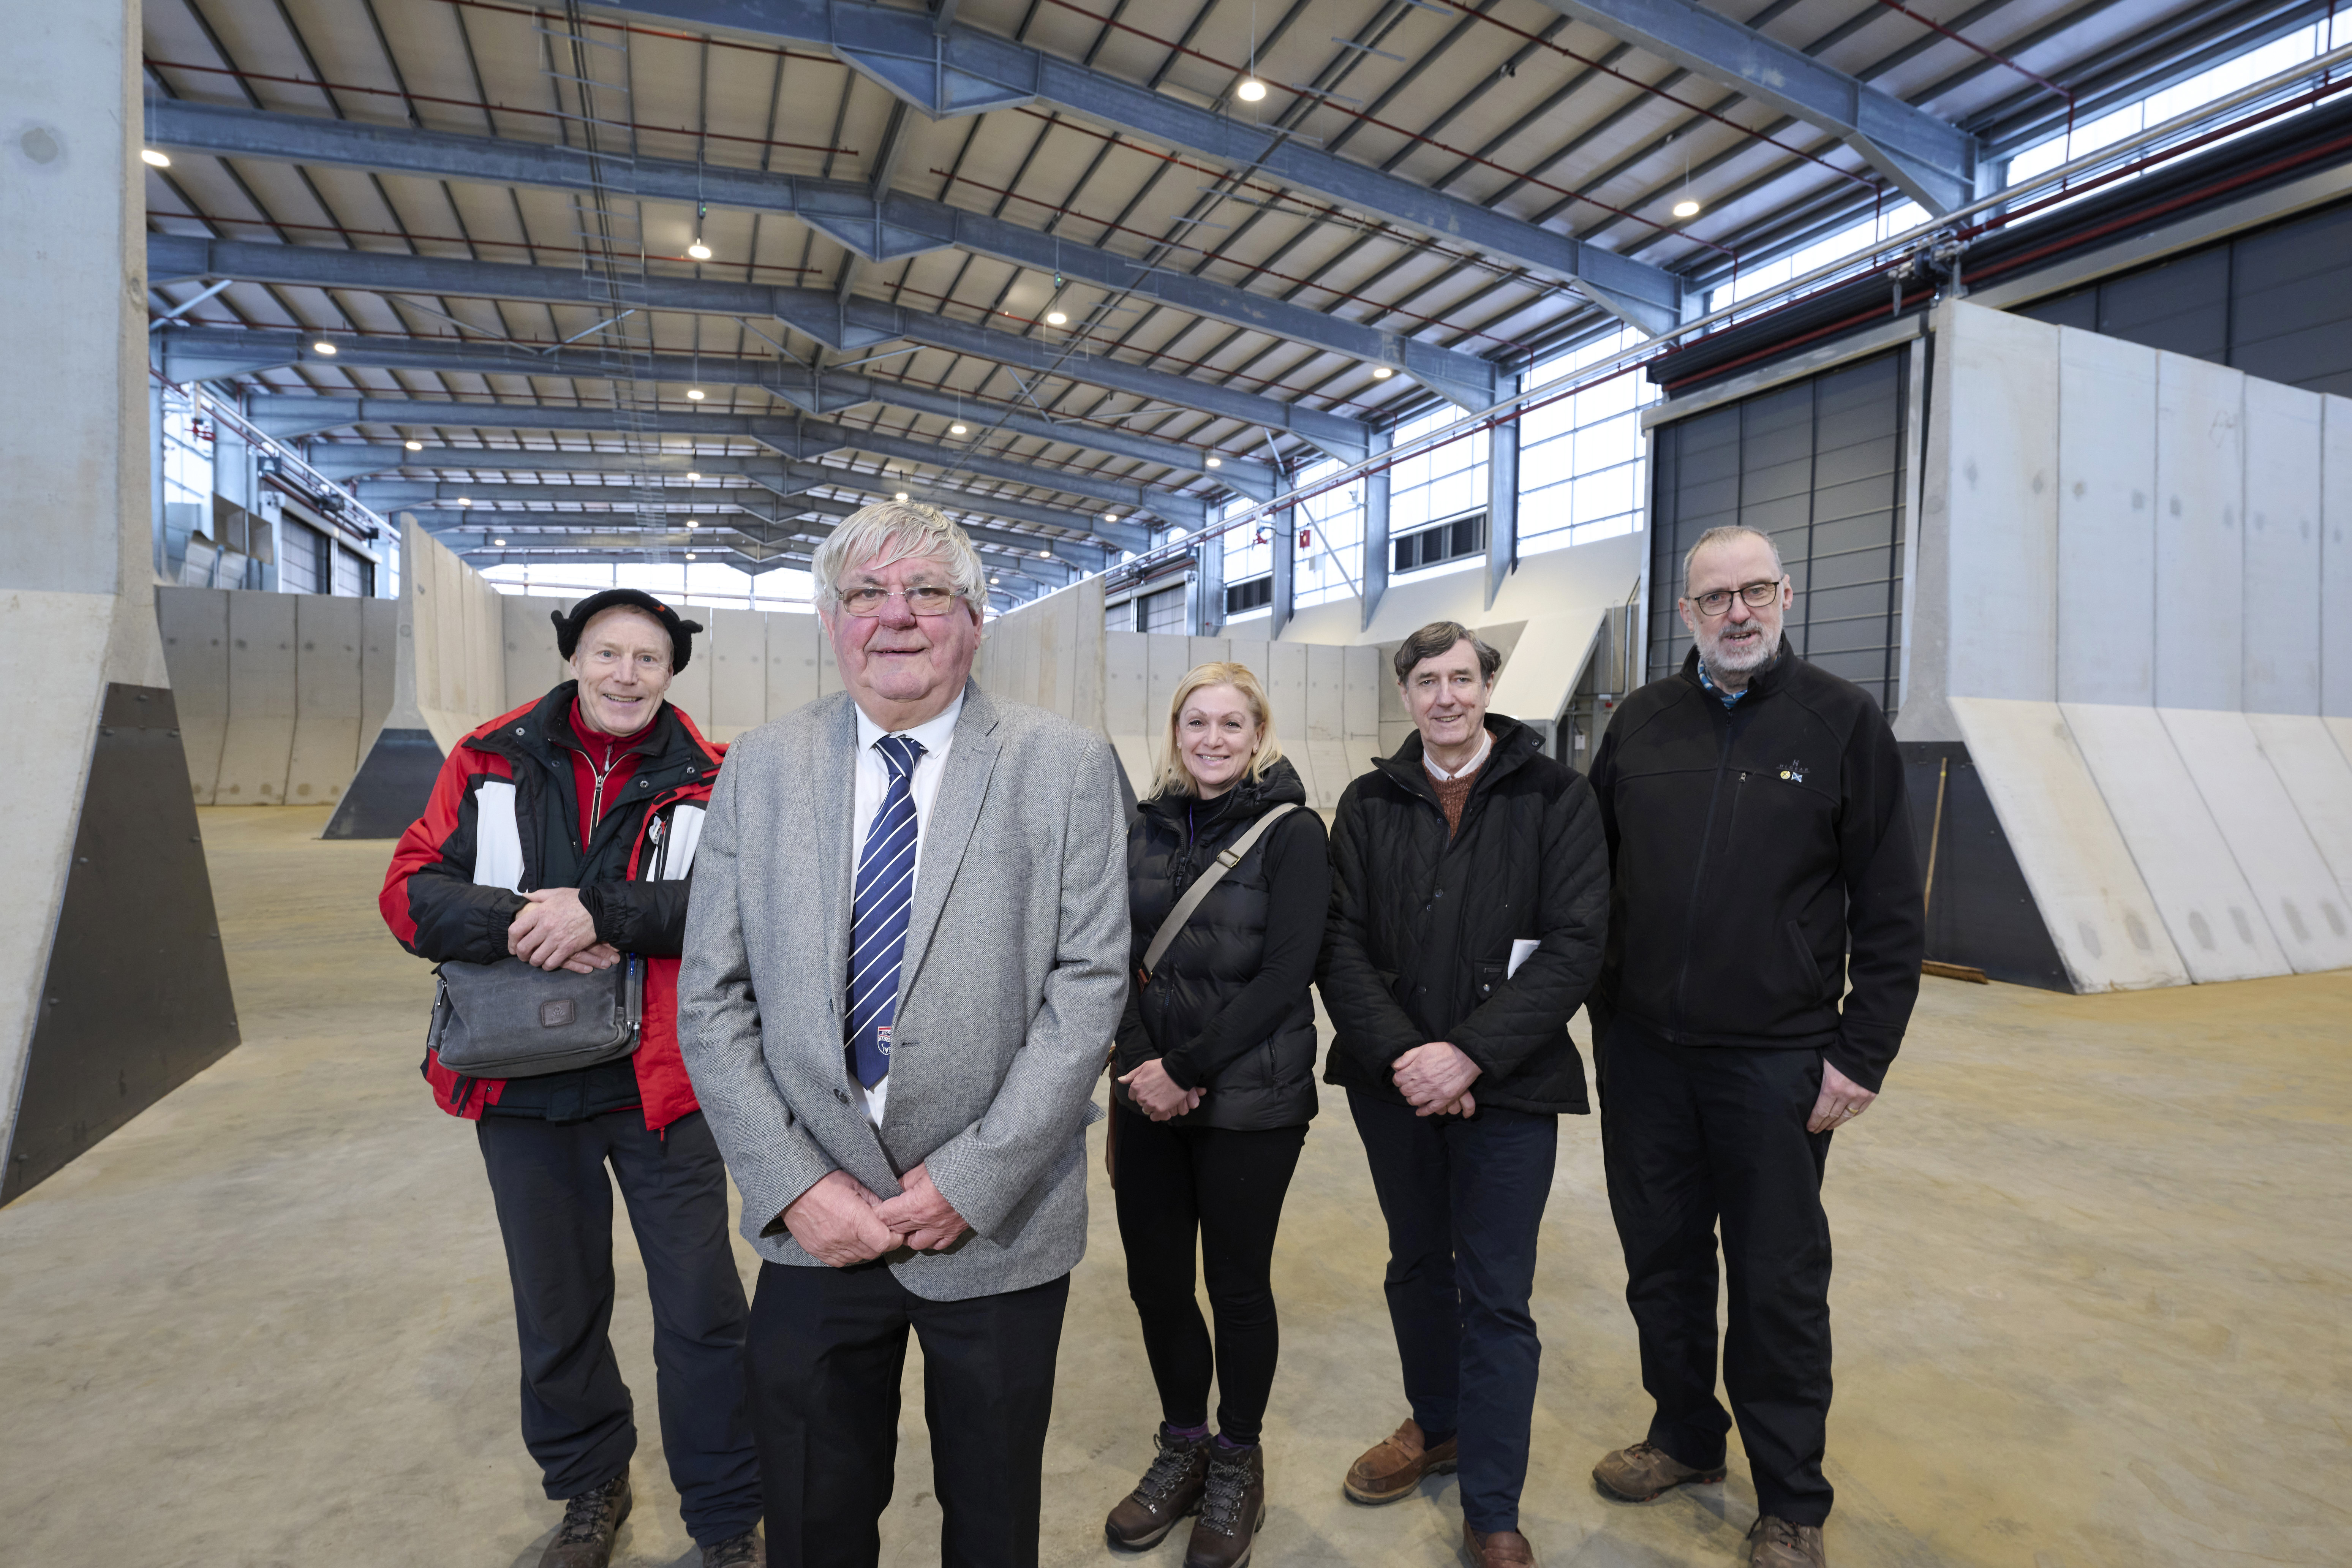 Inverness Waste Transfer Station completed